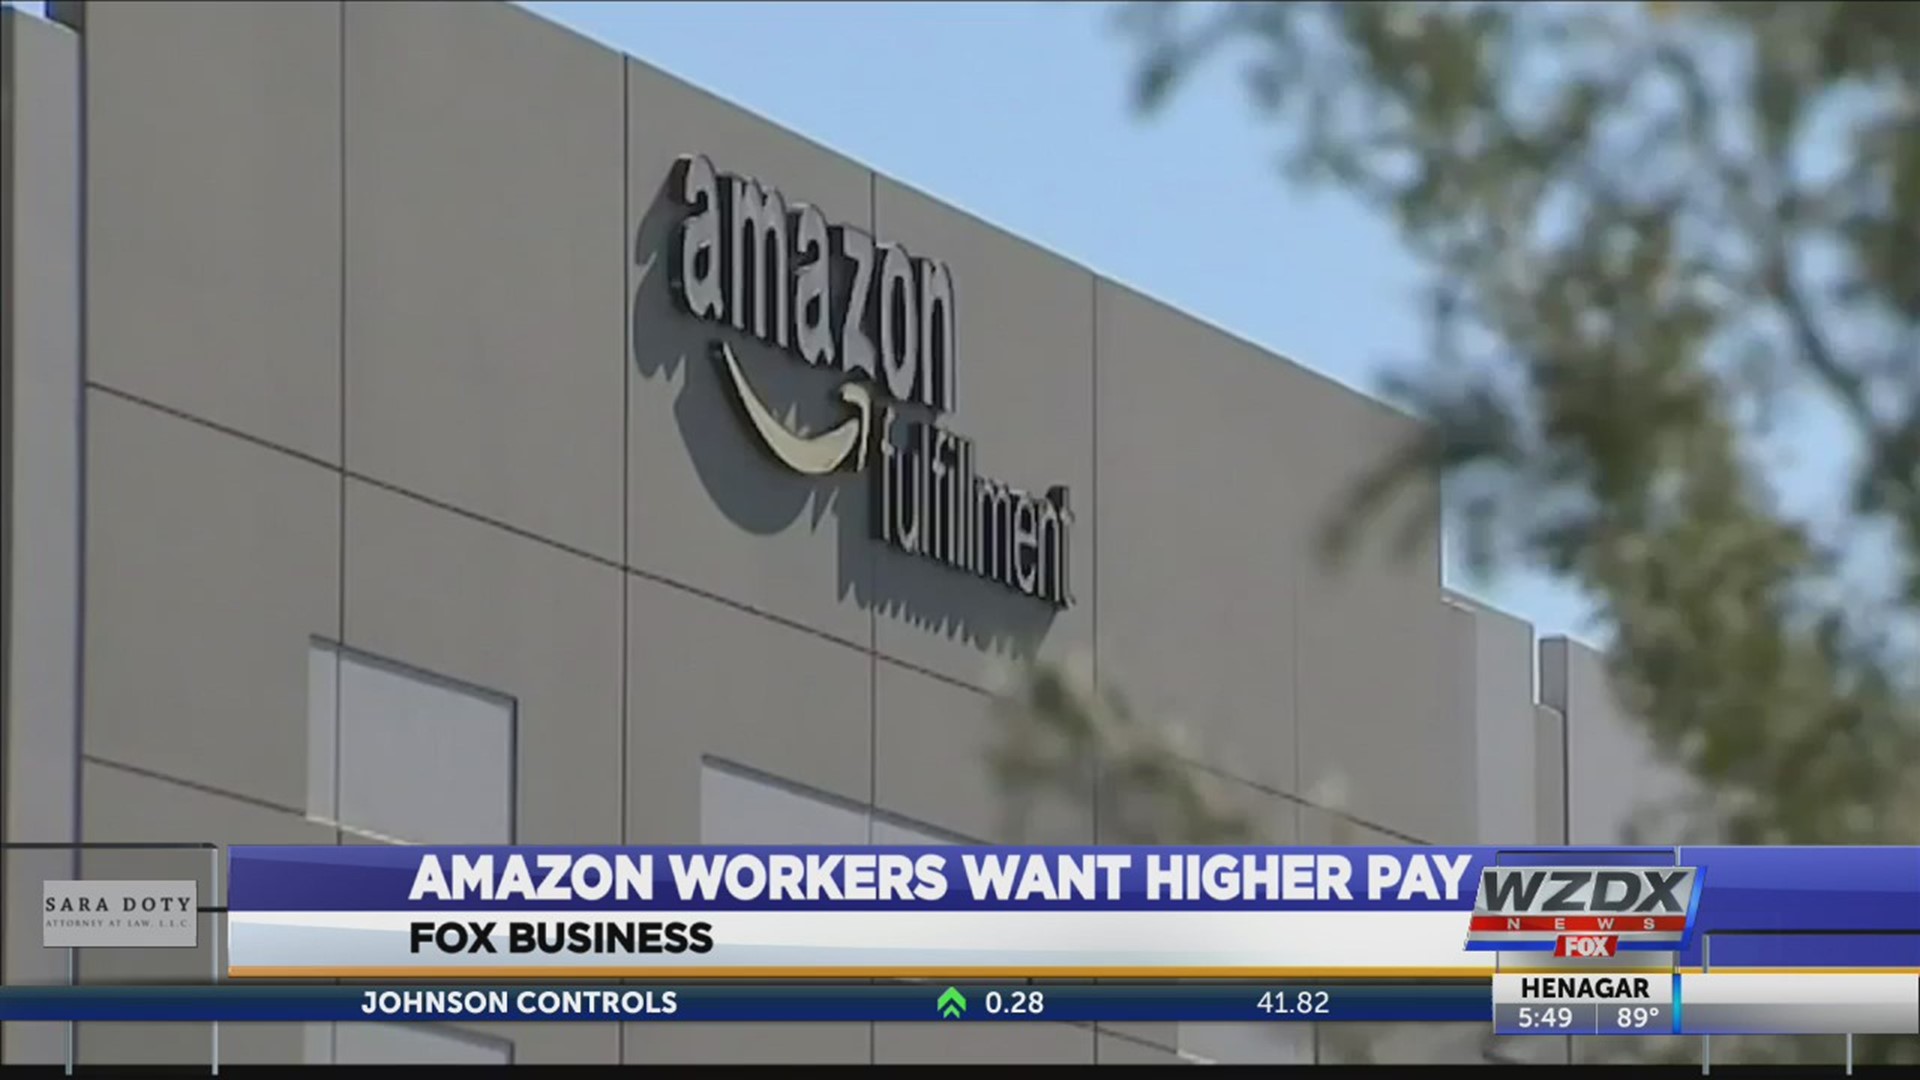 American Airlines & Boeing 737 Max, Amazon workers want higher pay.